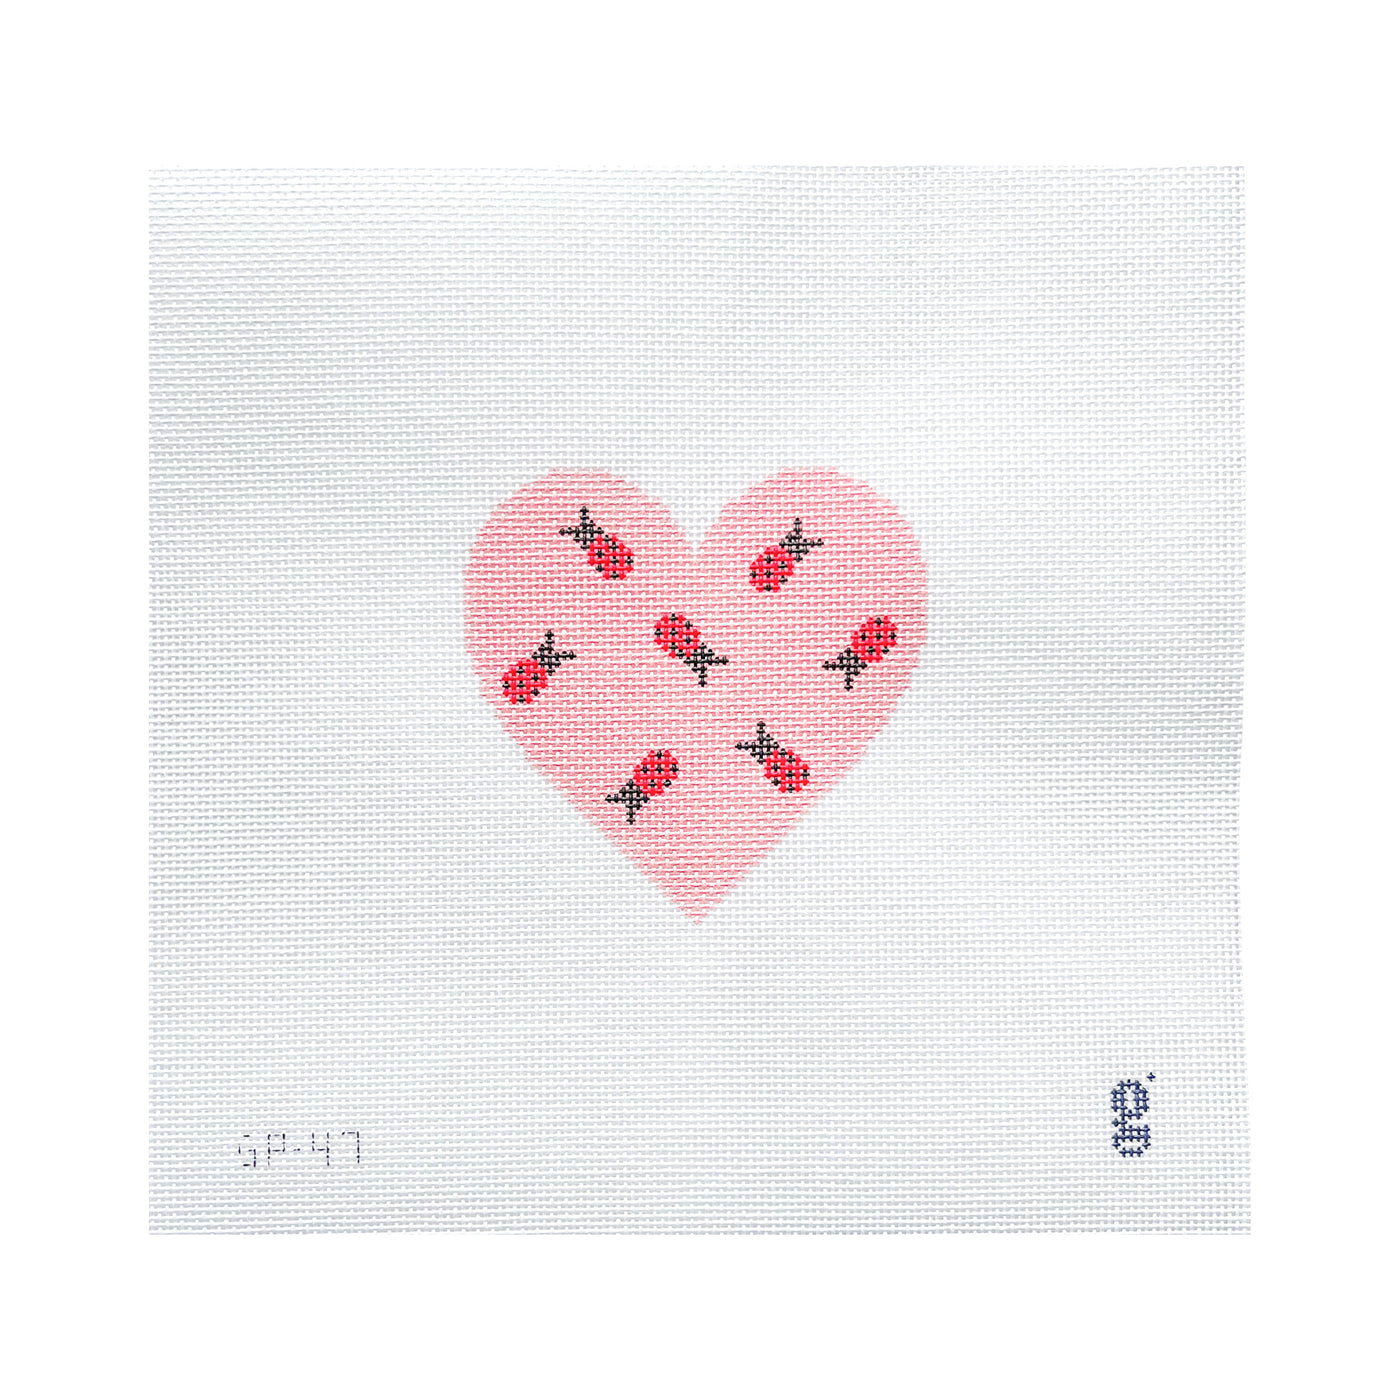 White square needlepoint canvas with a pink heart at center. Within the heart are 7 scattered ladybugs.